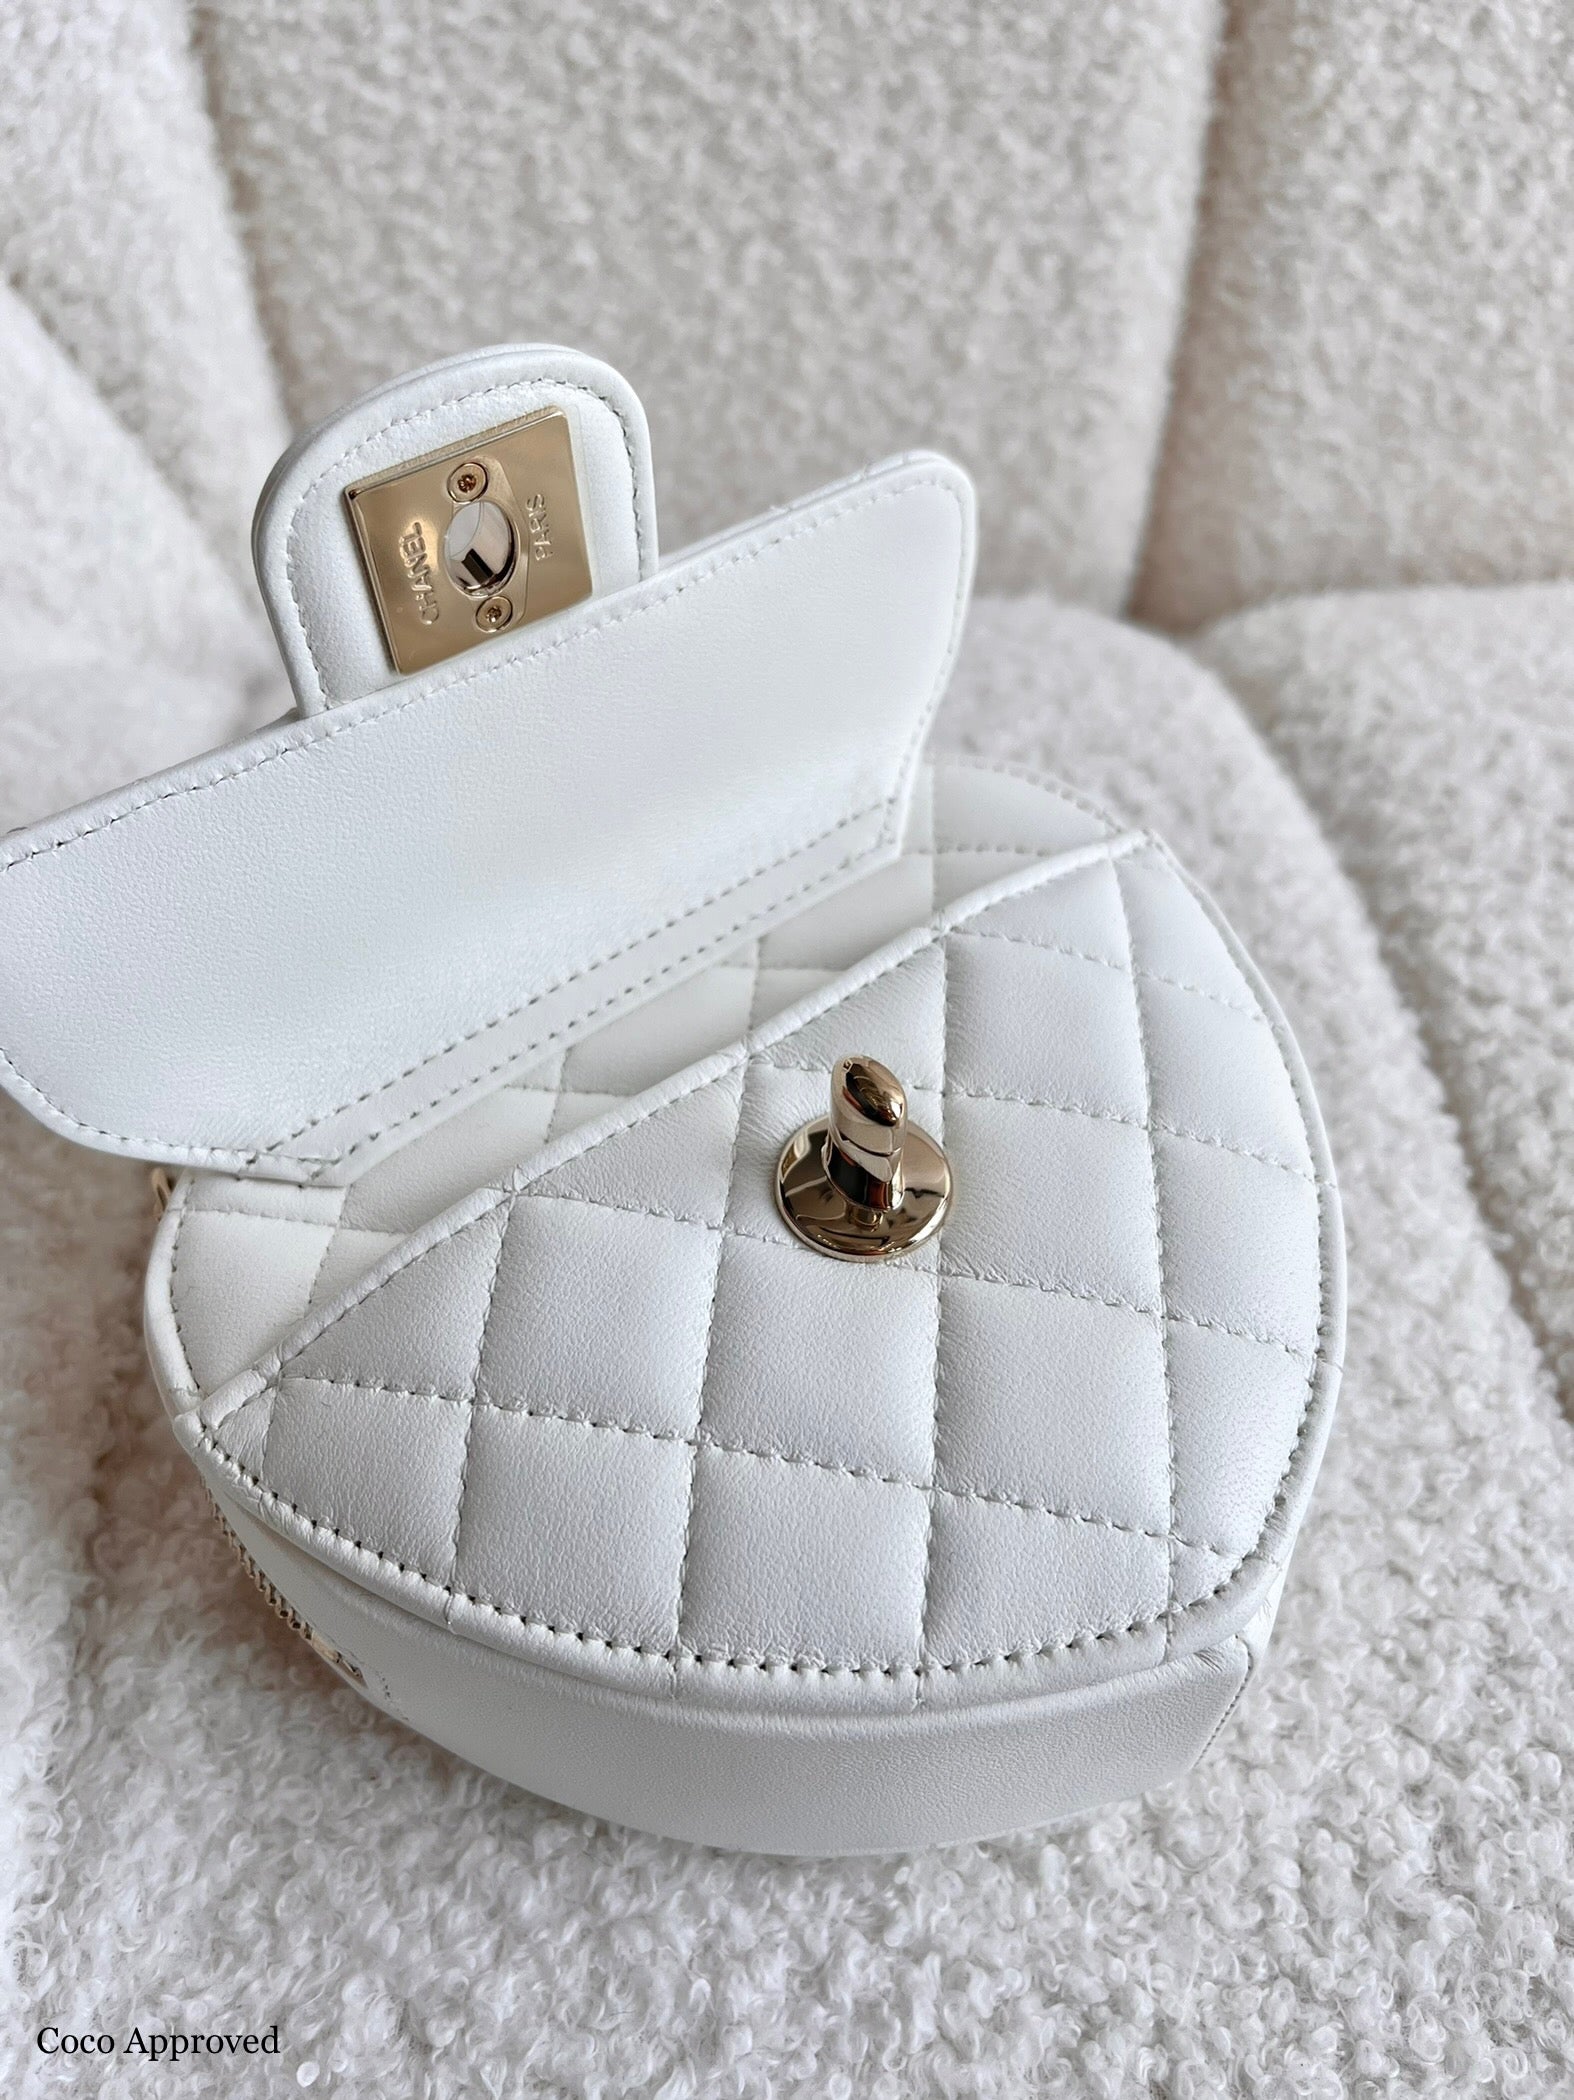 Chanel 22S Heart Bag Comparison & Review of ALL FIVE SIZES